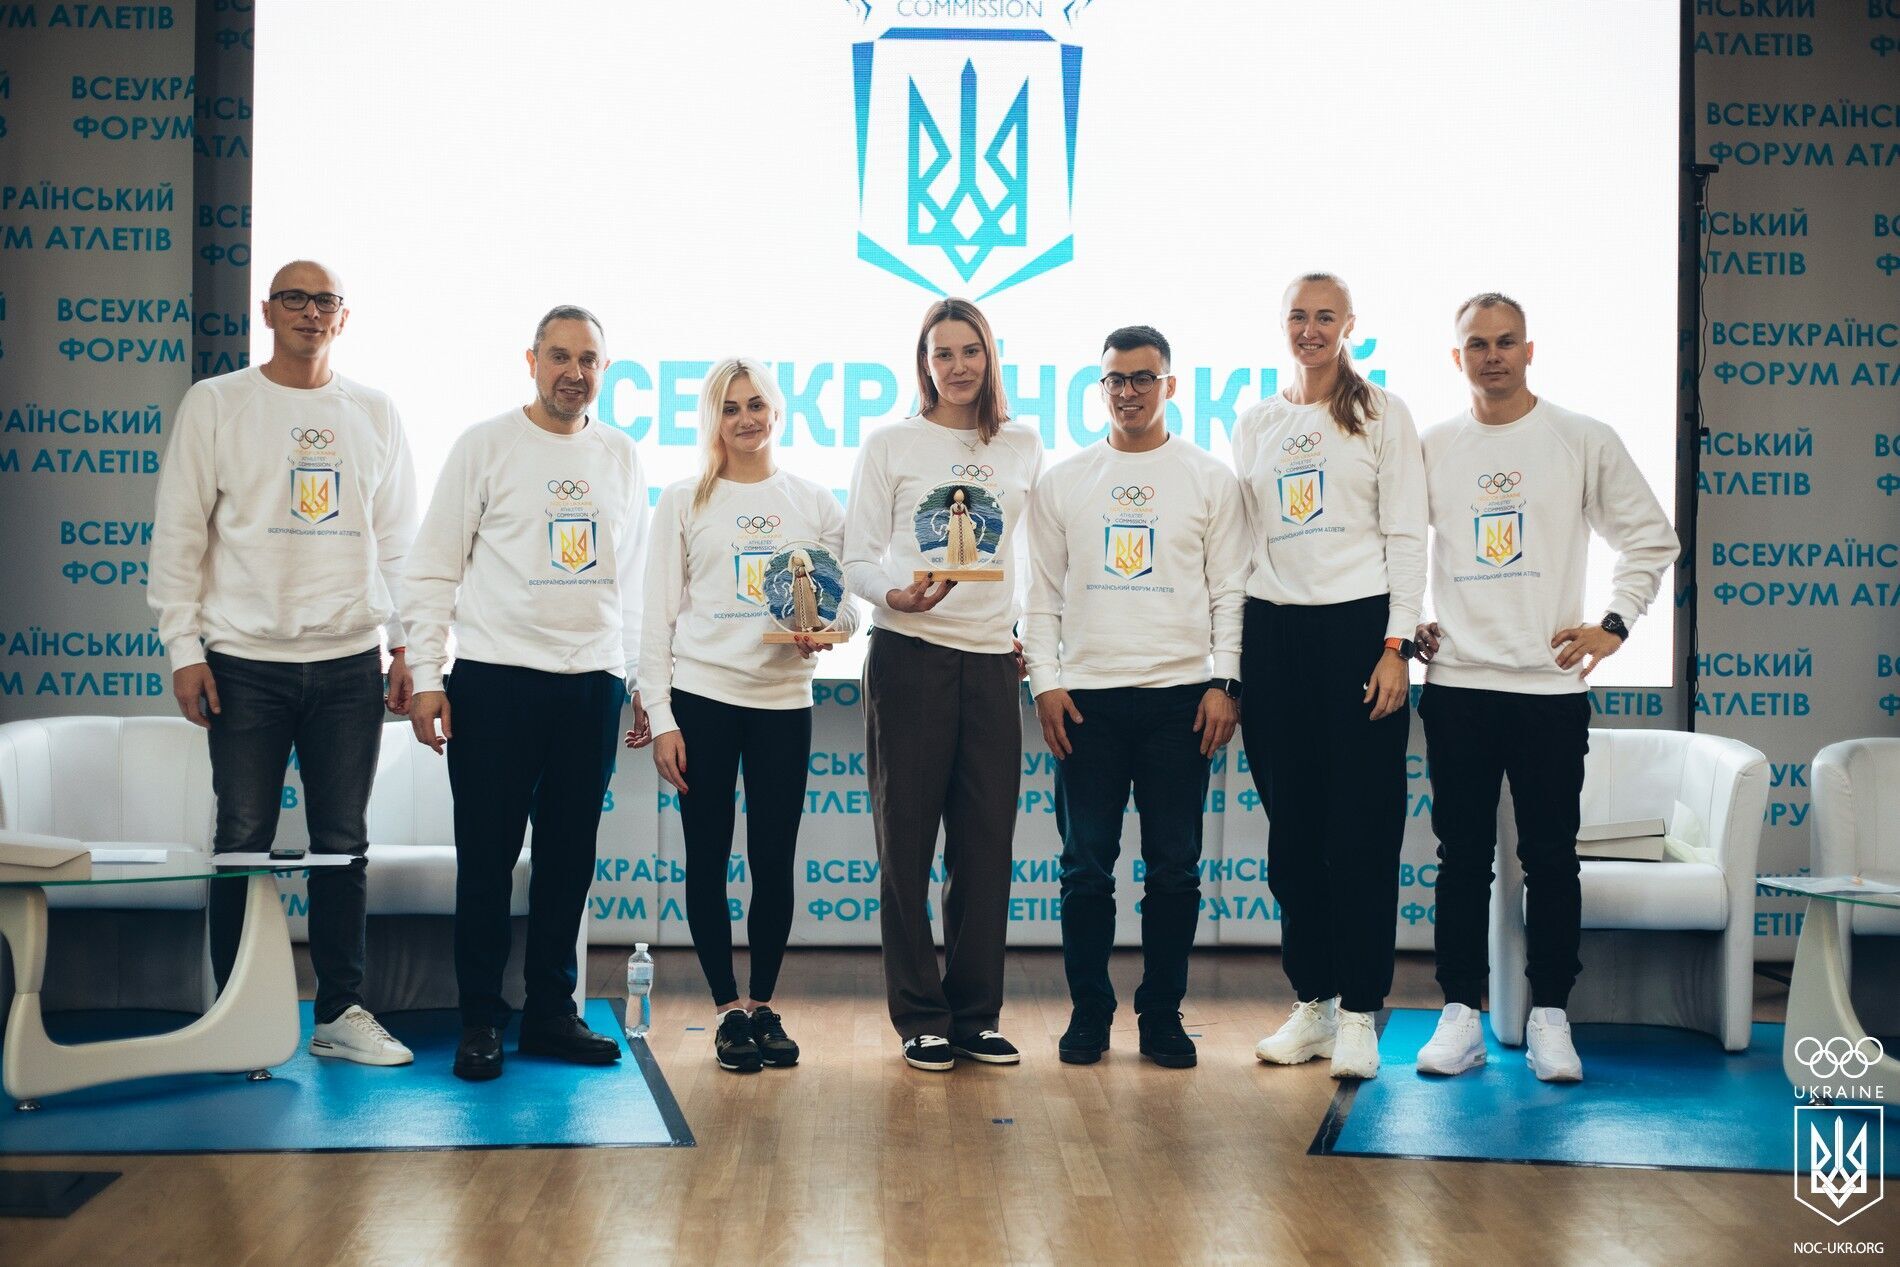 The All-Ukrainian Athletes Forum was held in Kyiv